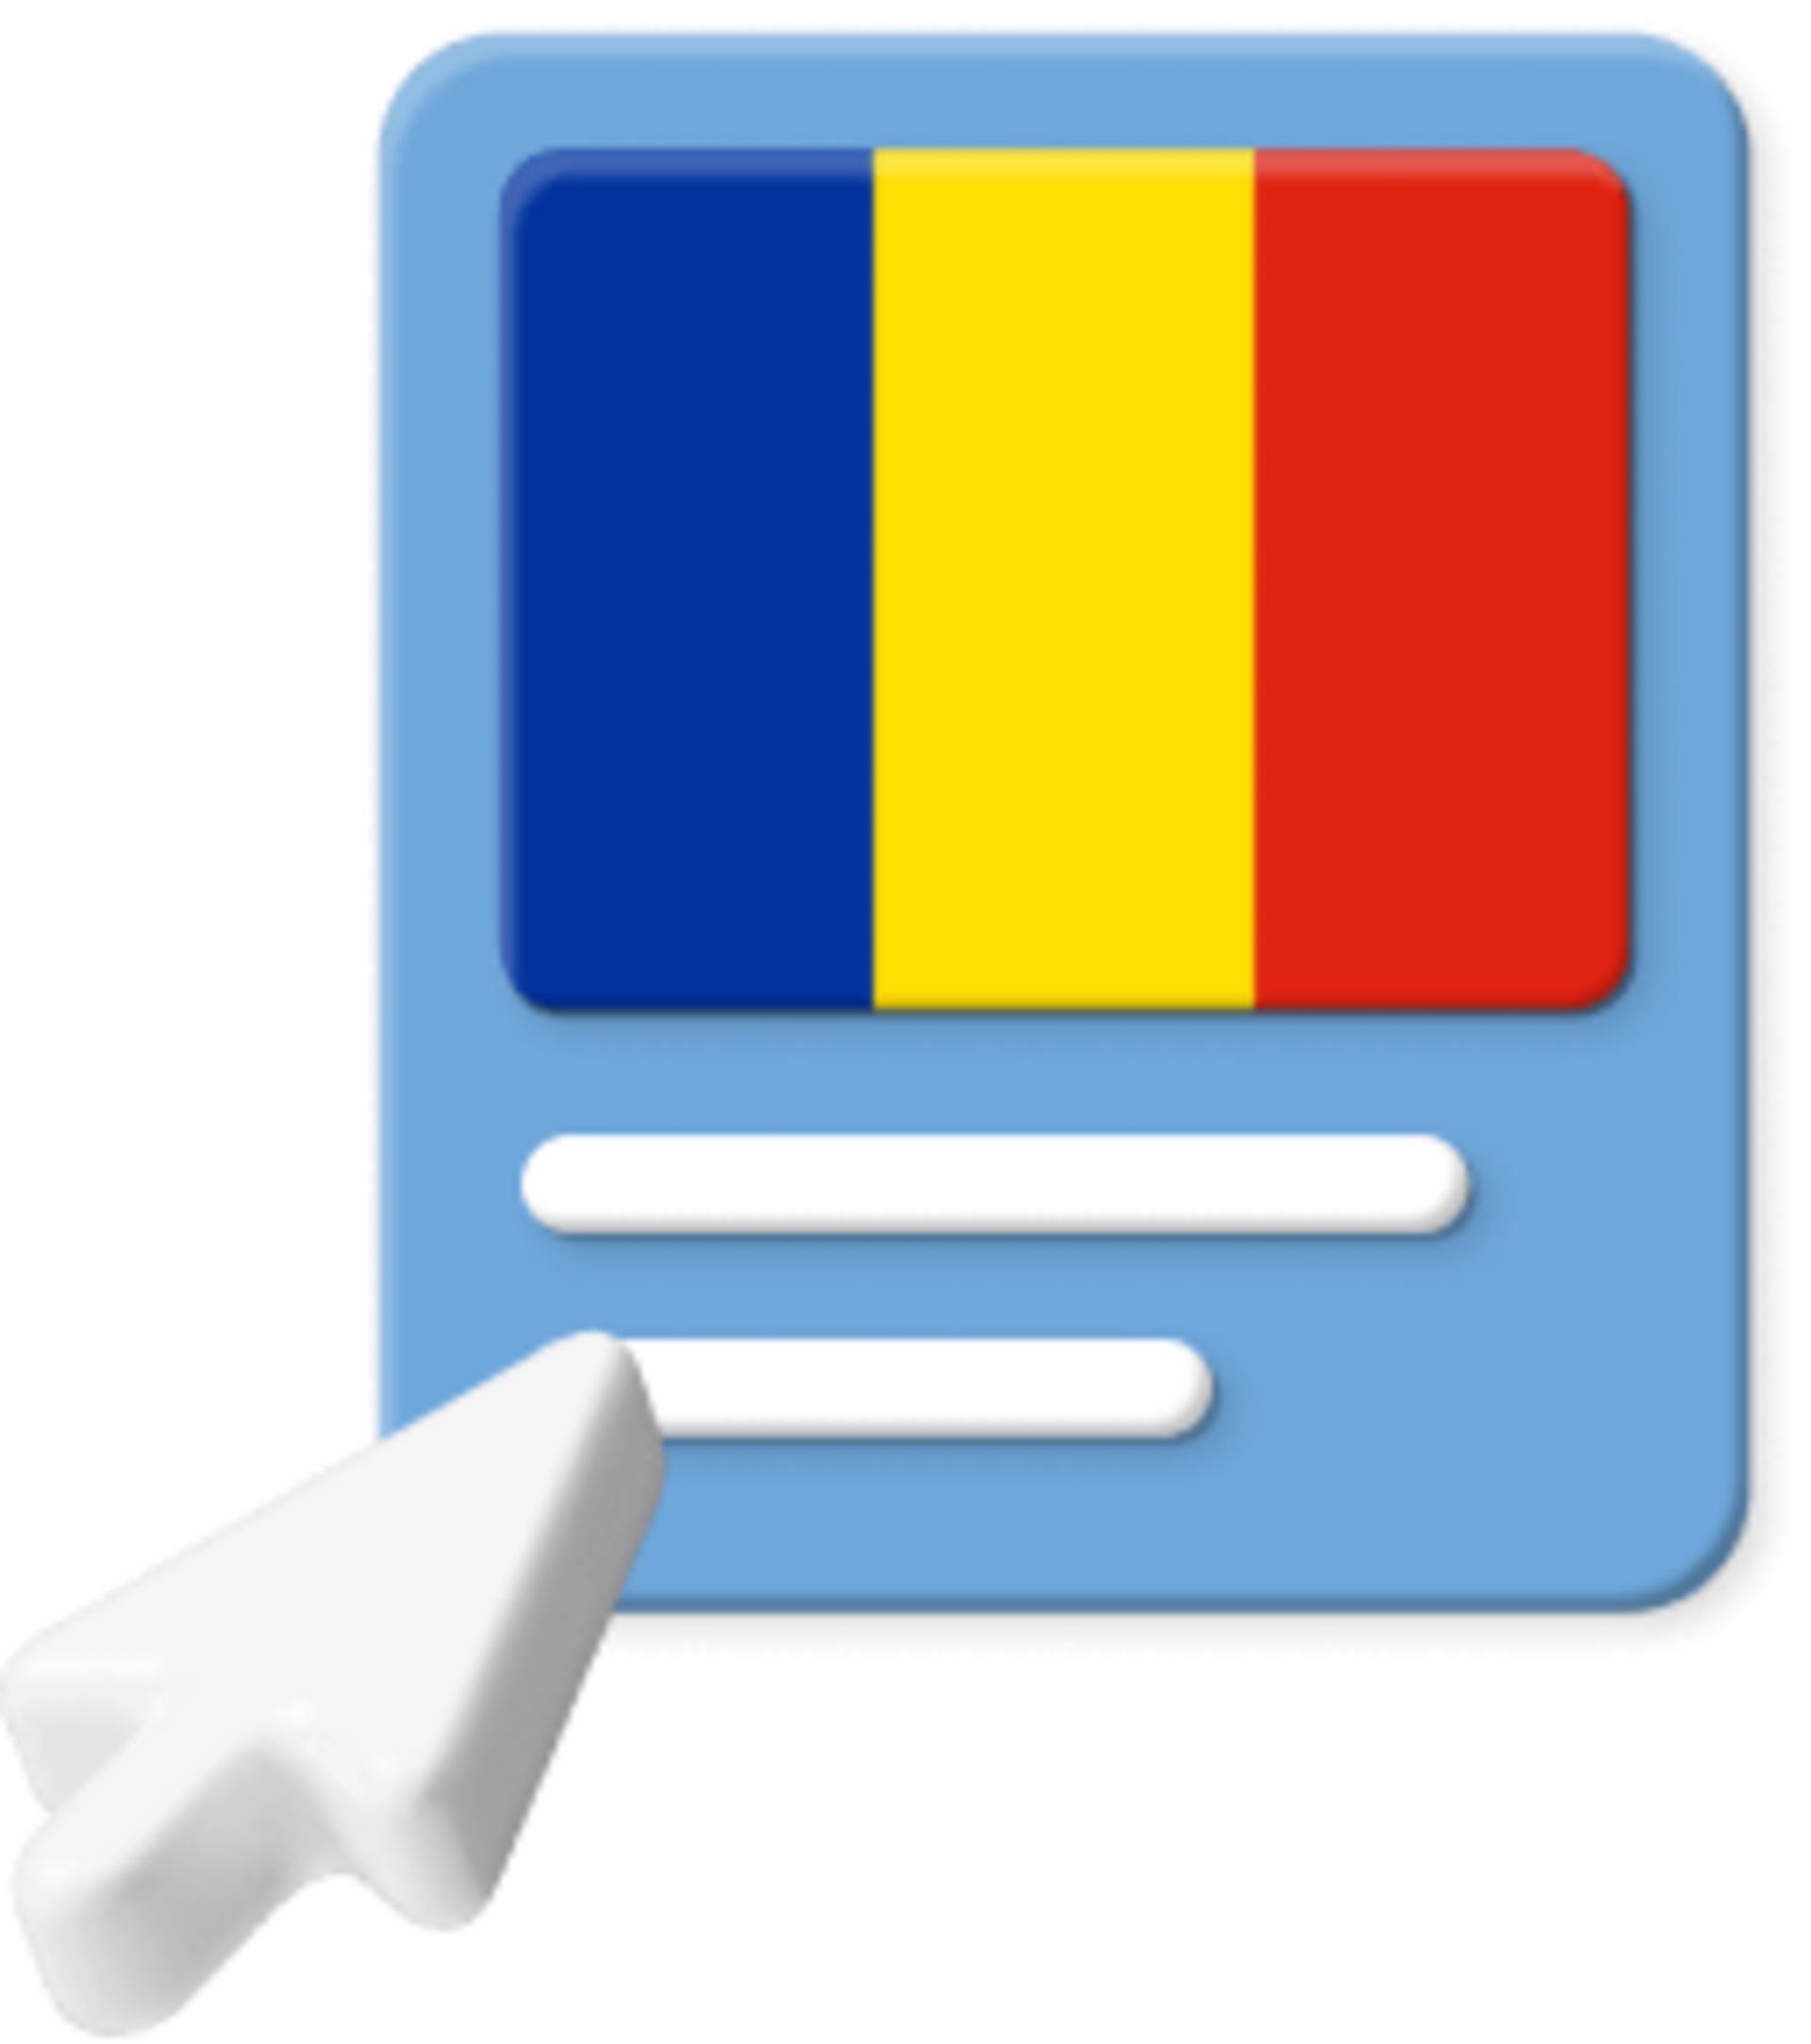 Romanian flag with pointer